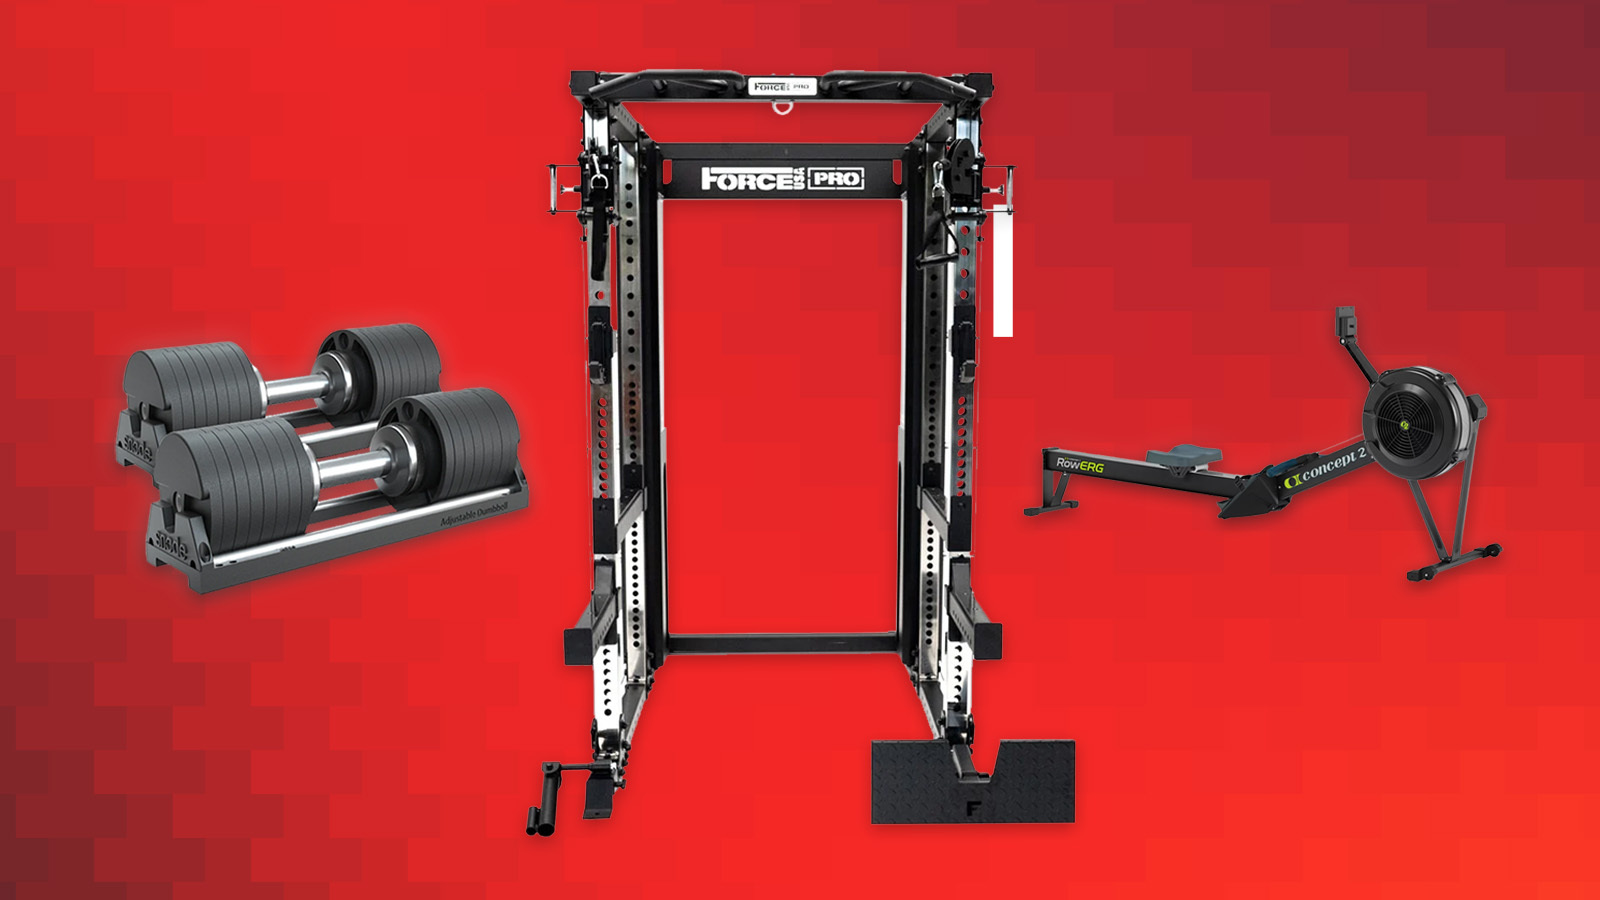 5 Pieces of Home Gym Equipment Everyone Should Have - My Garage